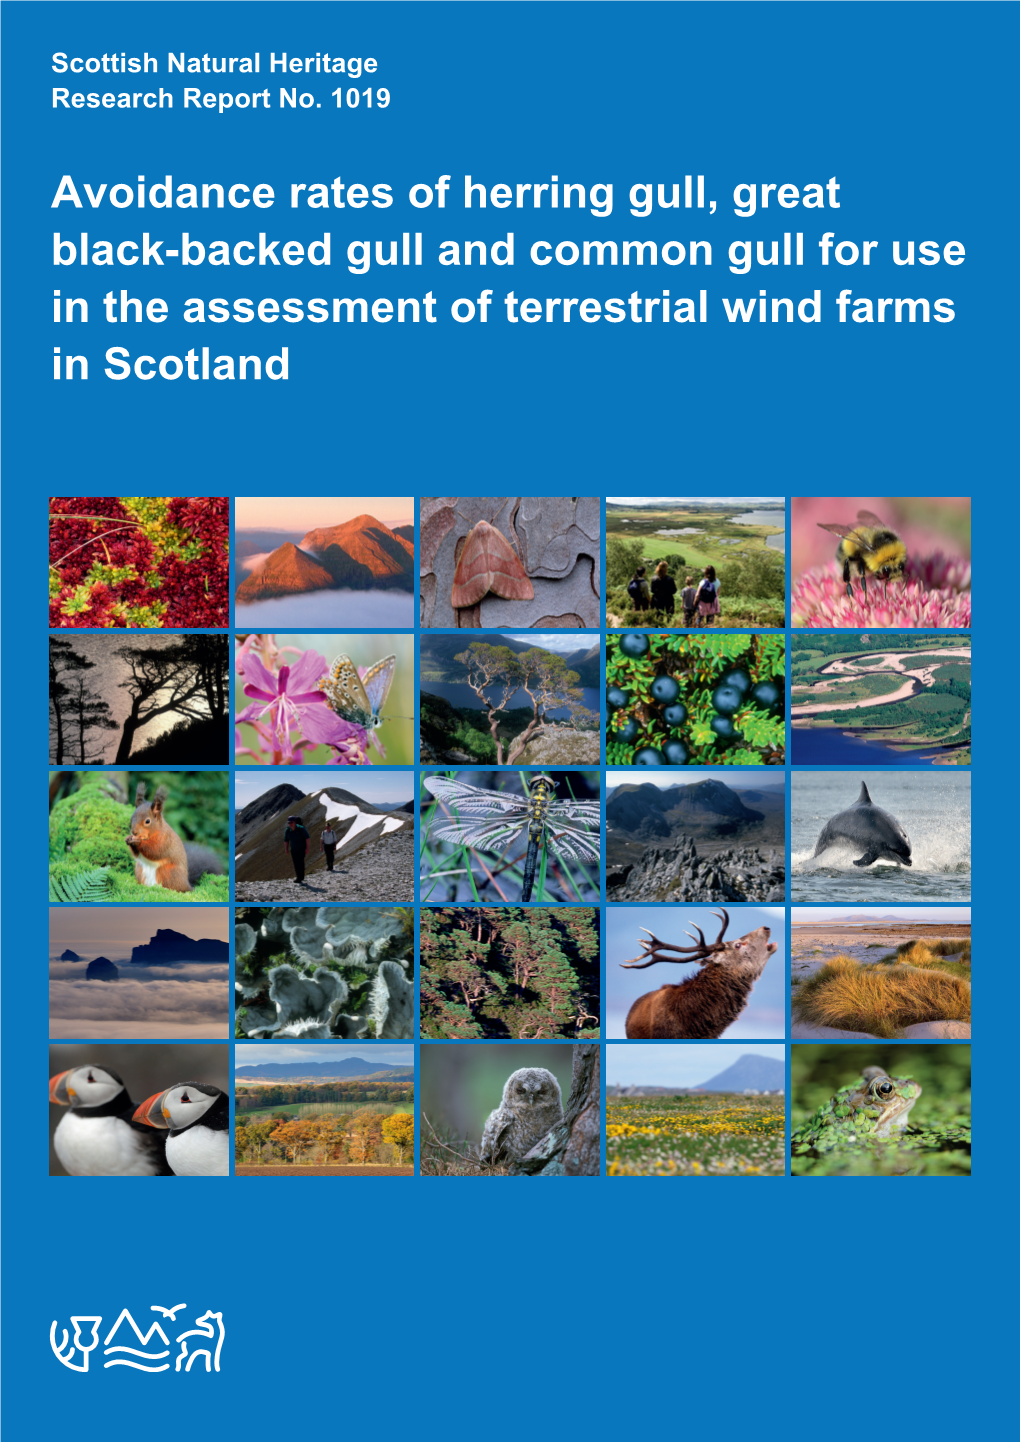 Avoidance Rates of Herring Gull, Great Black-Backed Gull and Common Gull for Use in the Assessment of Terrestrial Wind Farms in Scotland